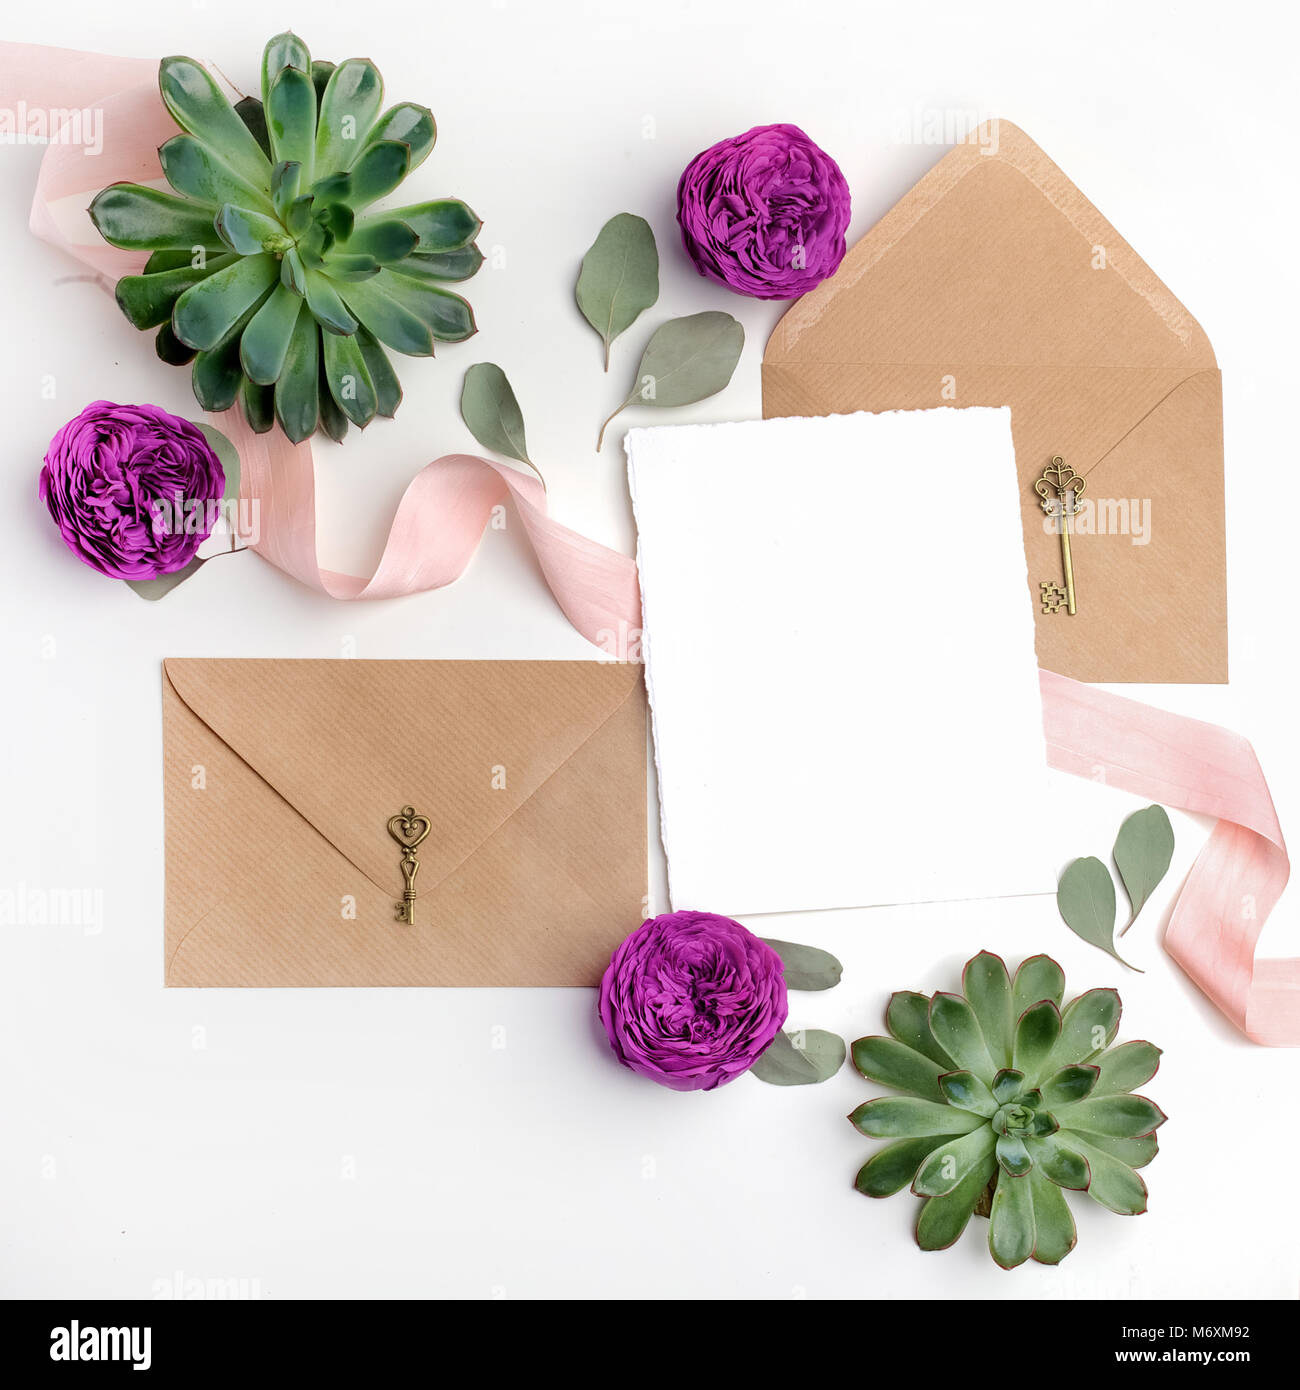 Flat Lay Shot Of Letter And Eco Paper Envelope On White Background